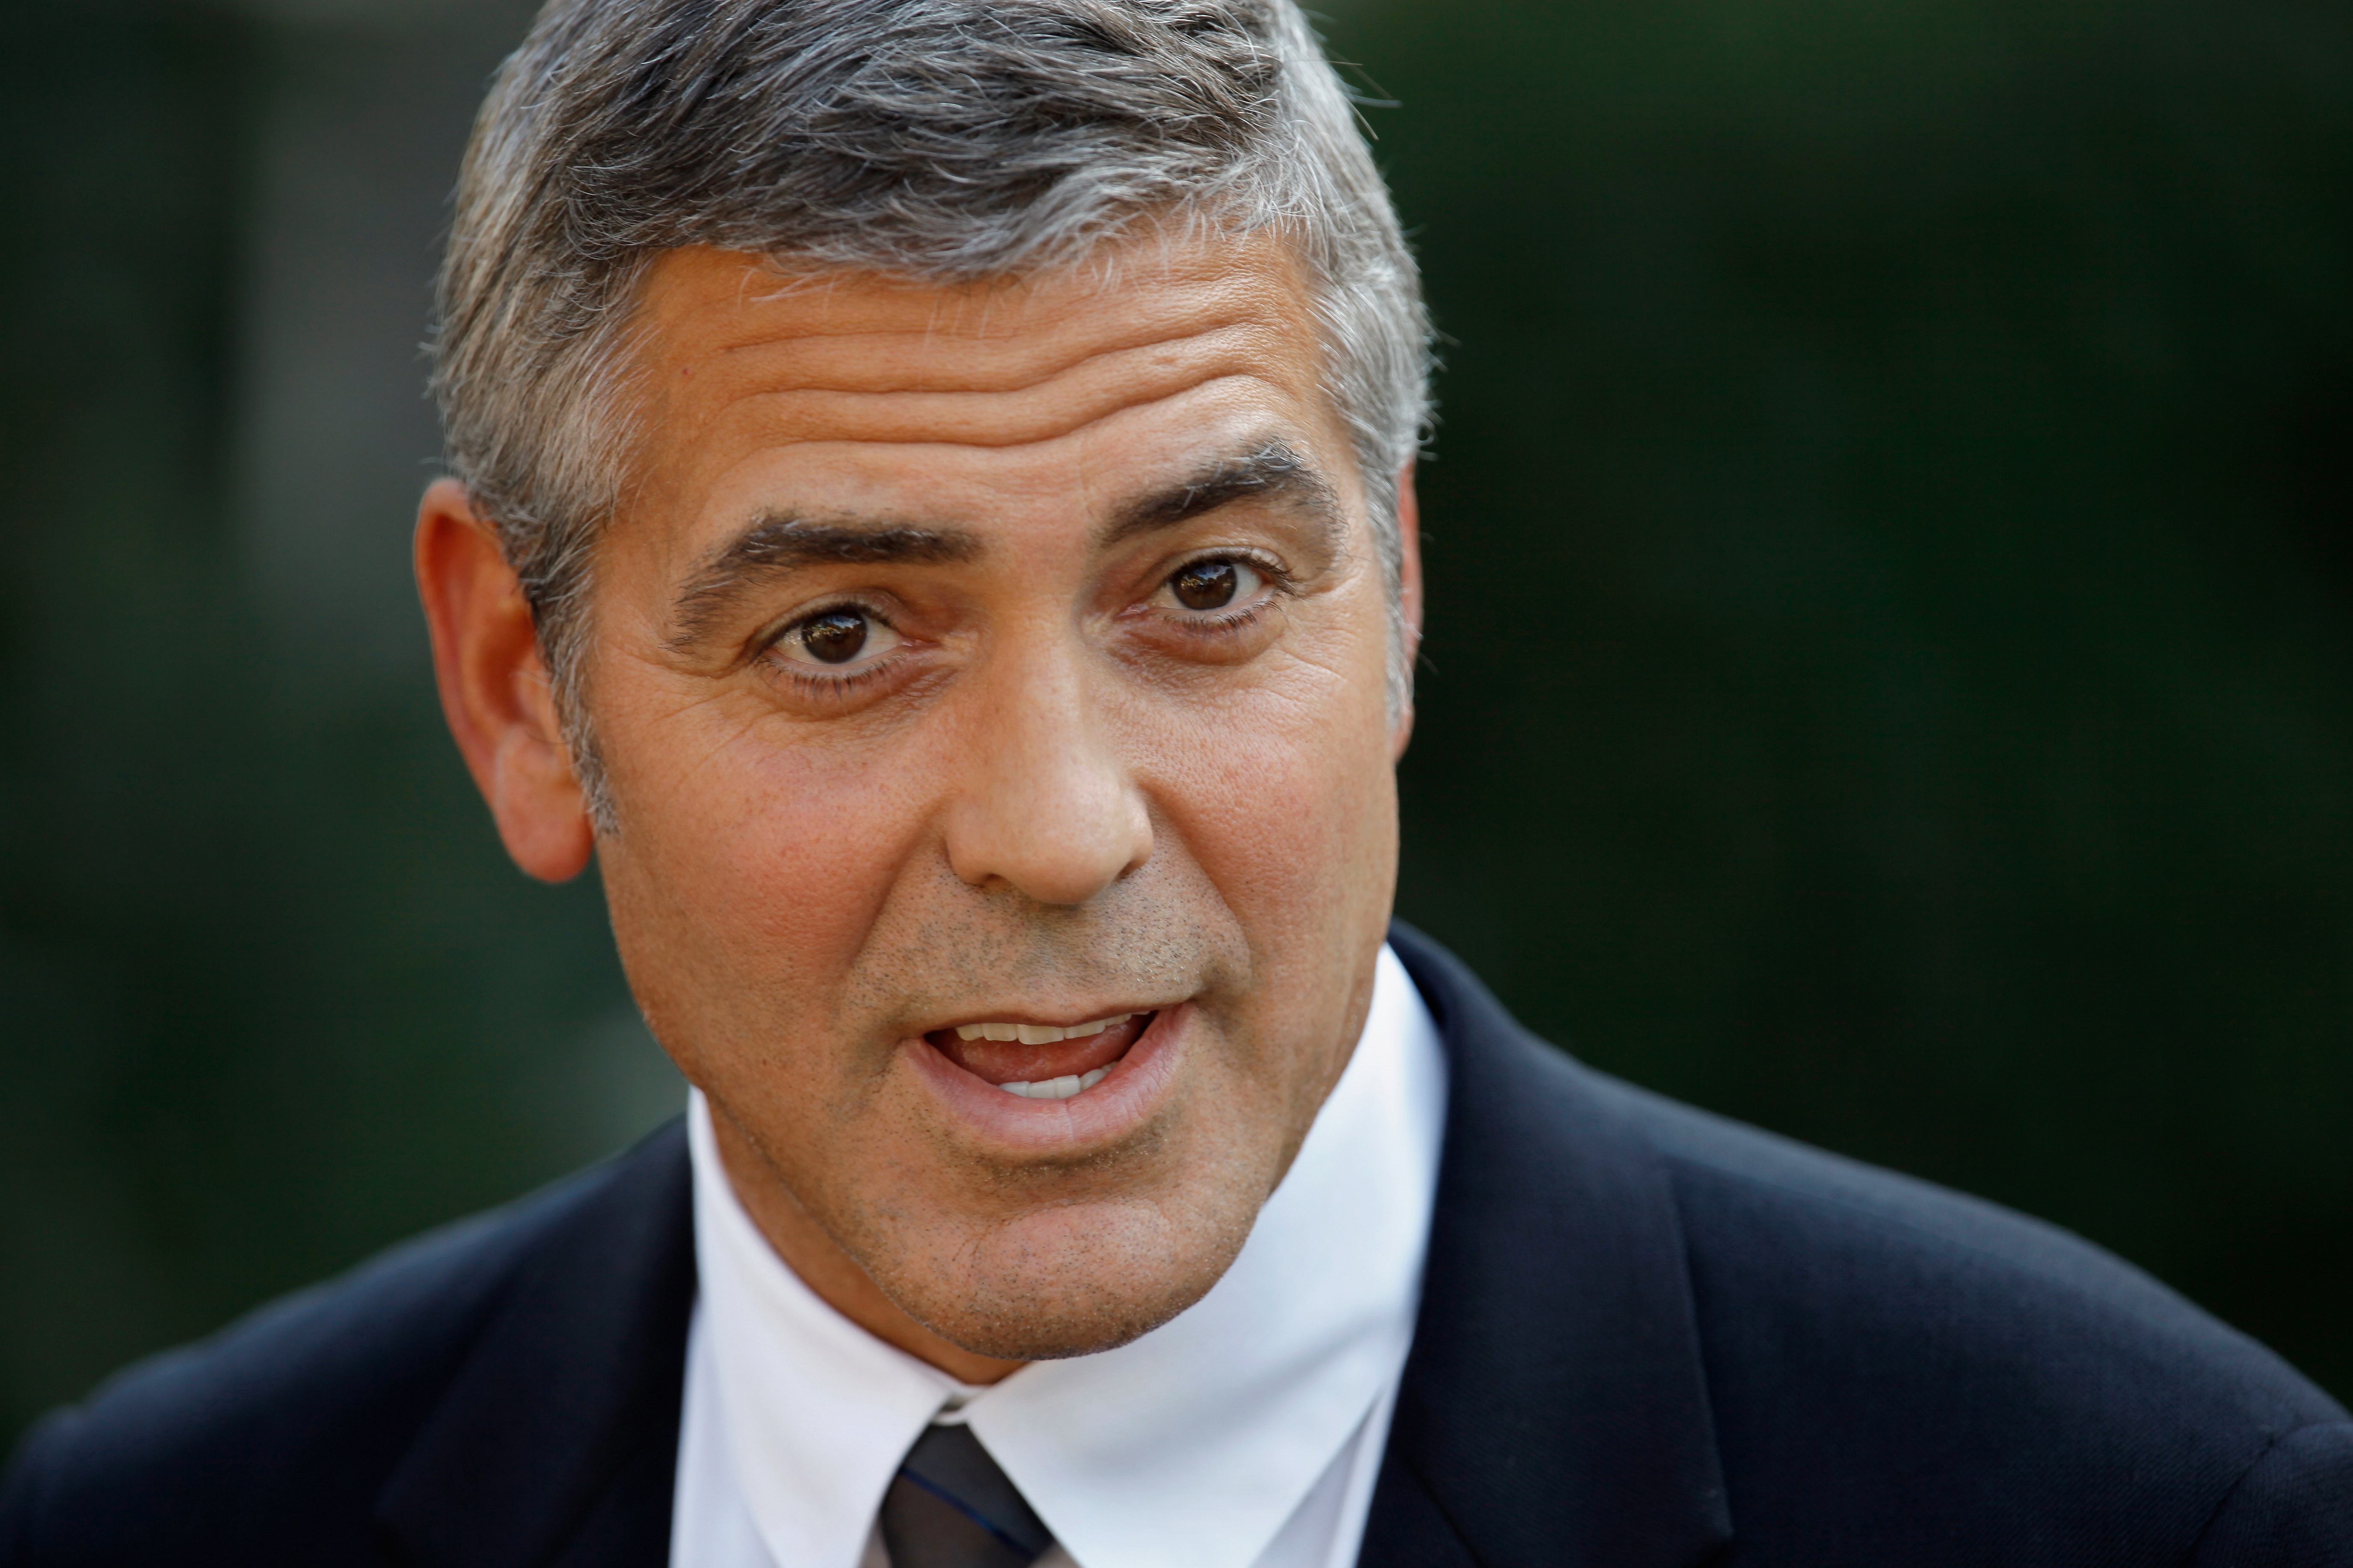 George Clooney Wallpaper Image Photos Pictures Background